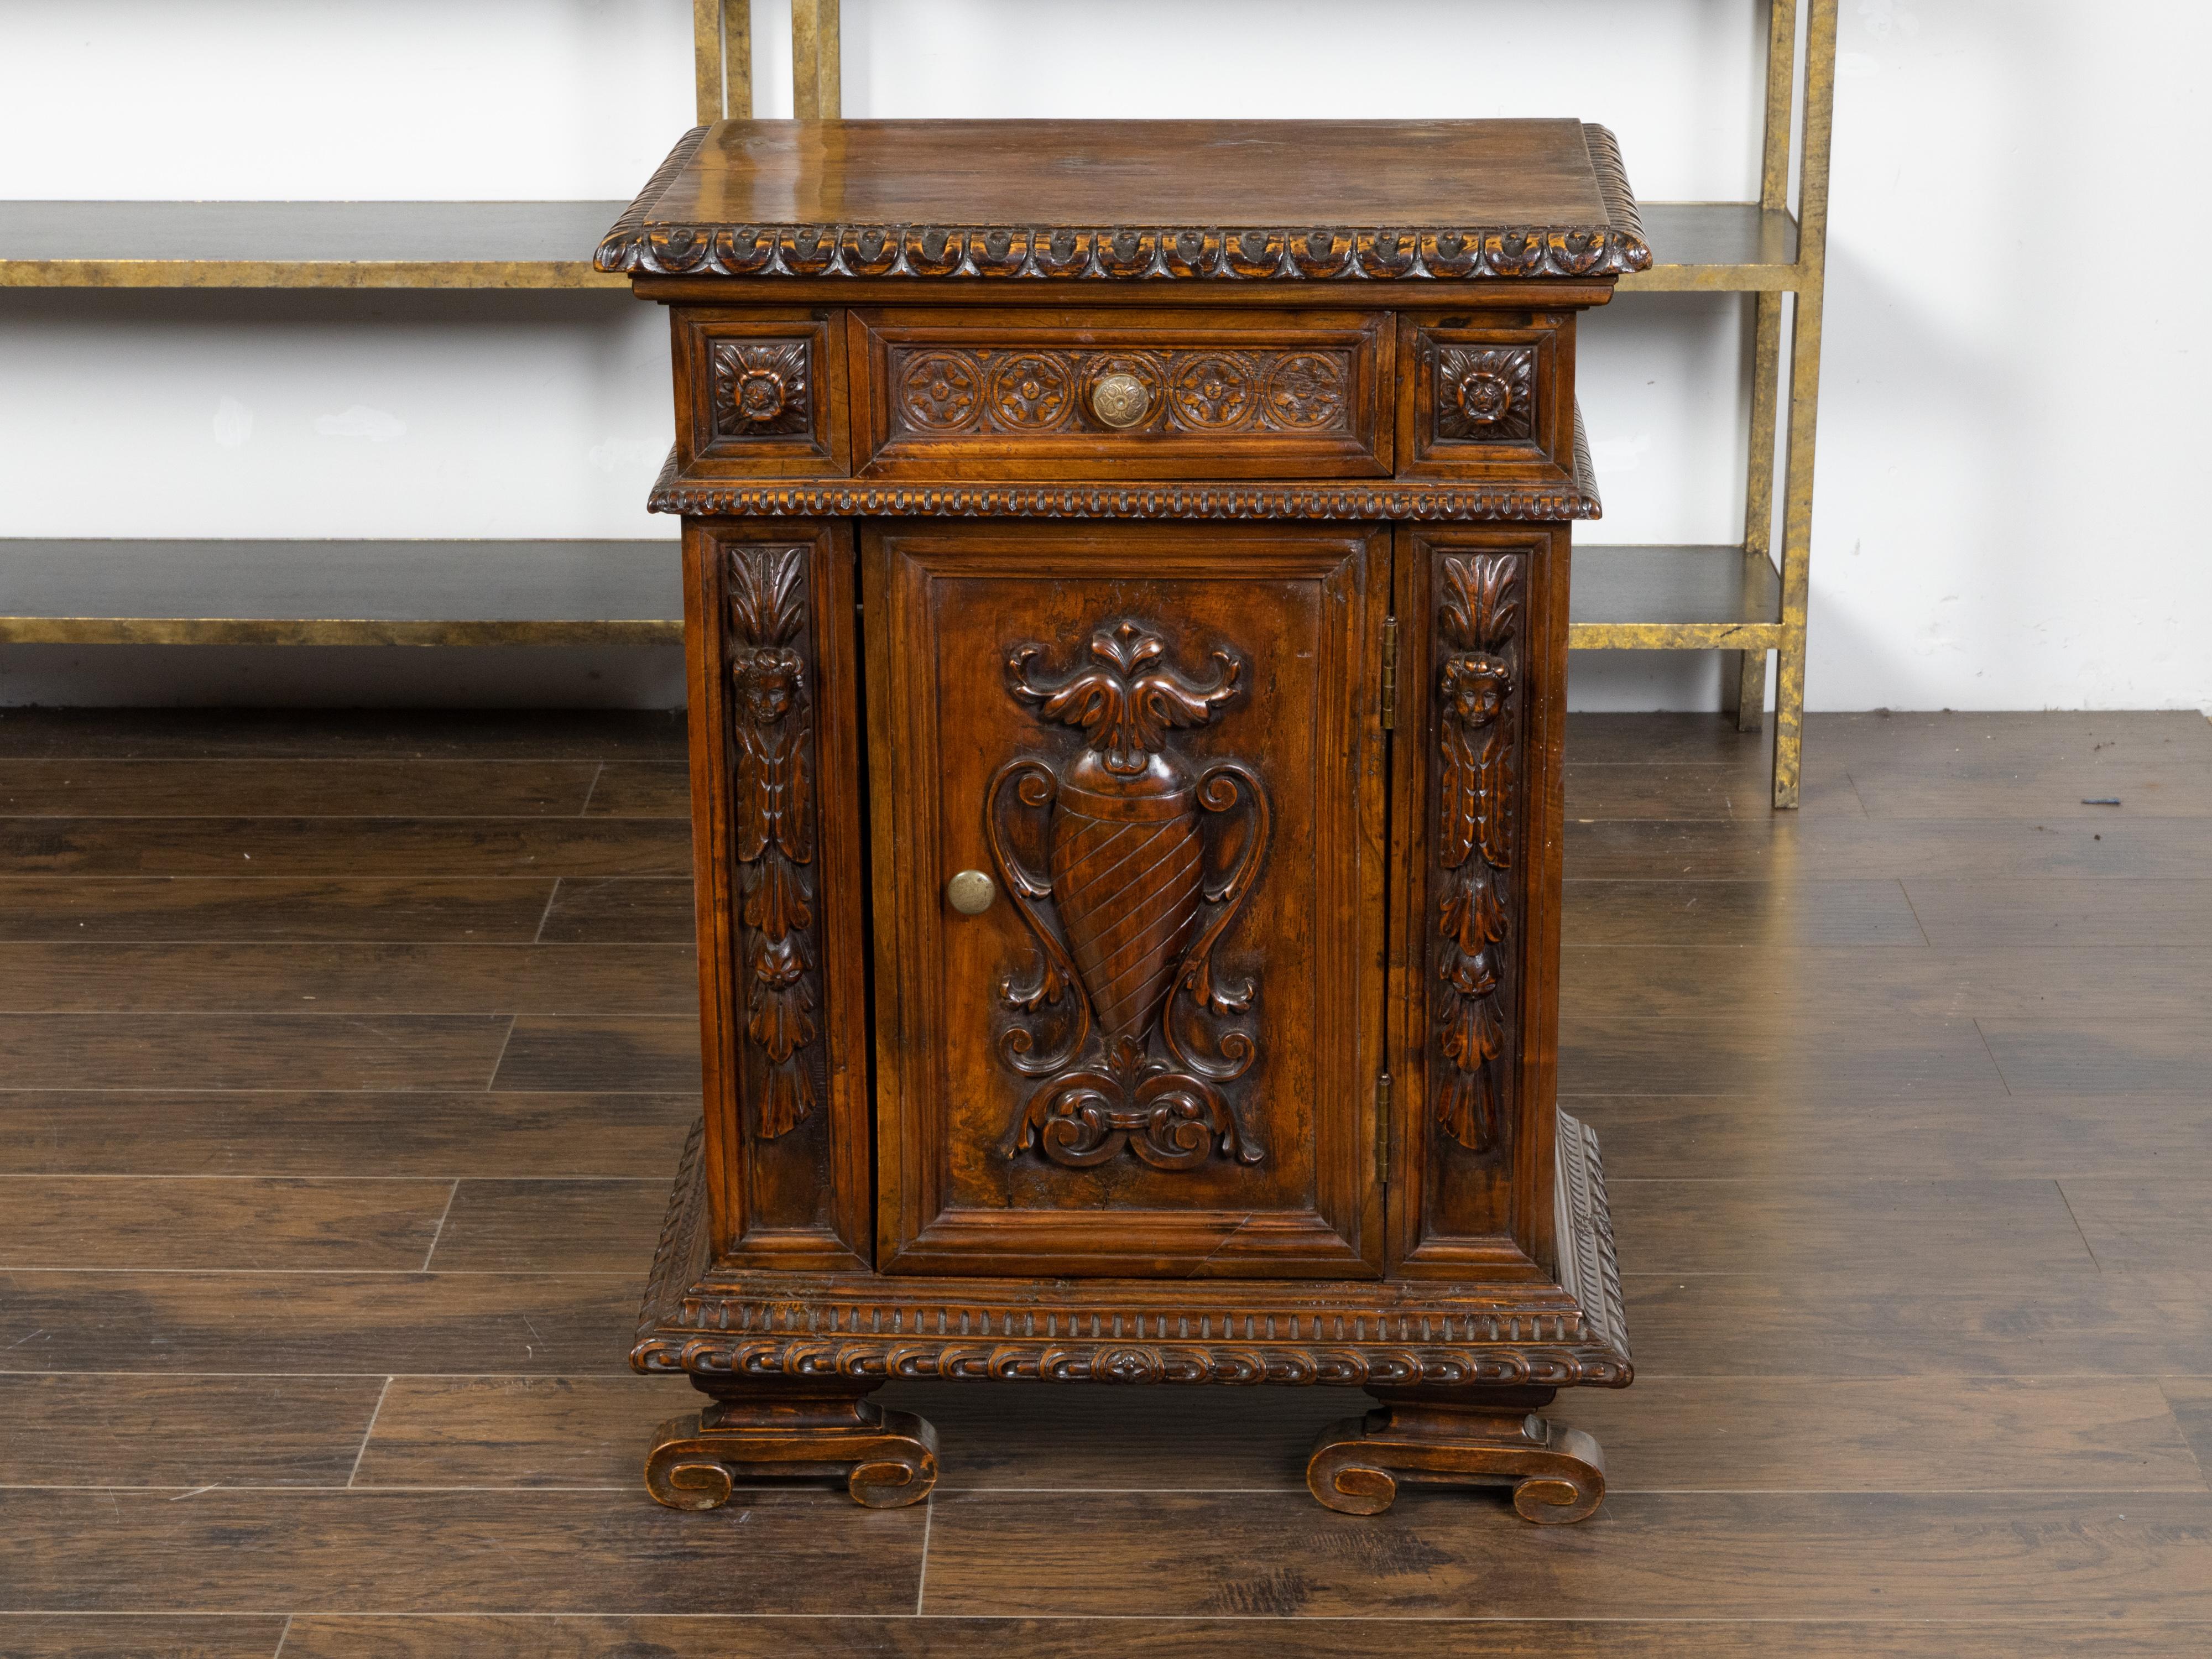 An Italian walnut small cabinet from the early 19th century, with single drawer over single door, carved foliage, vase and mascaron motifs. Created in Italy during the early years of the 19th century, this walnut cabinet features a rectangular top